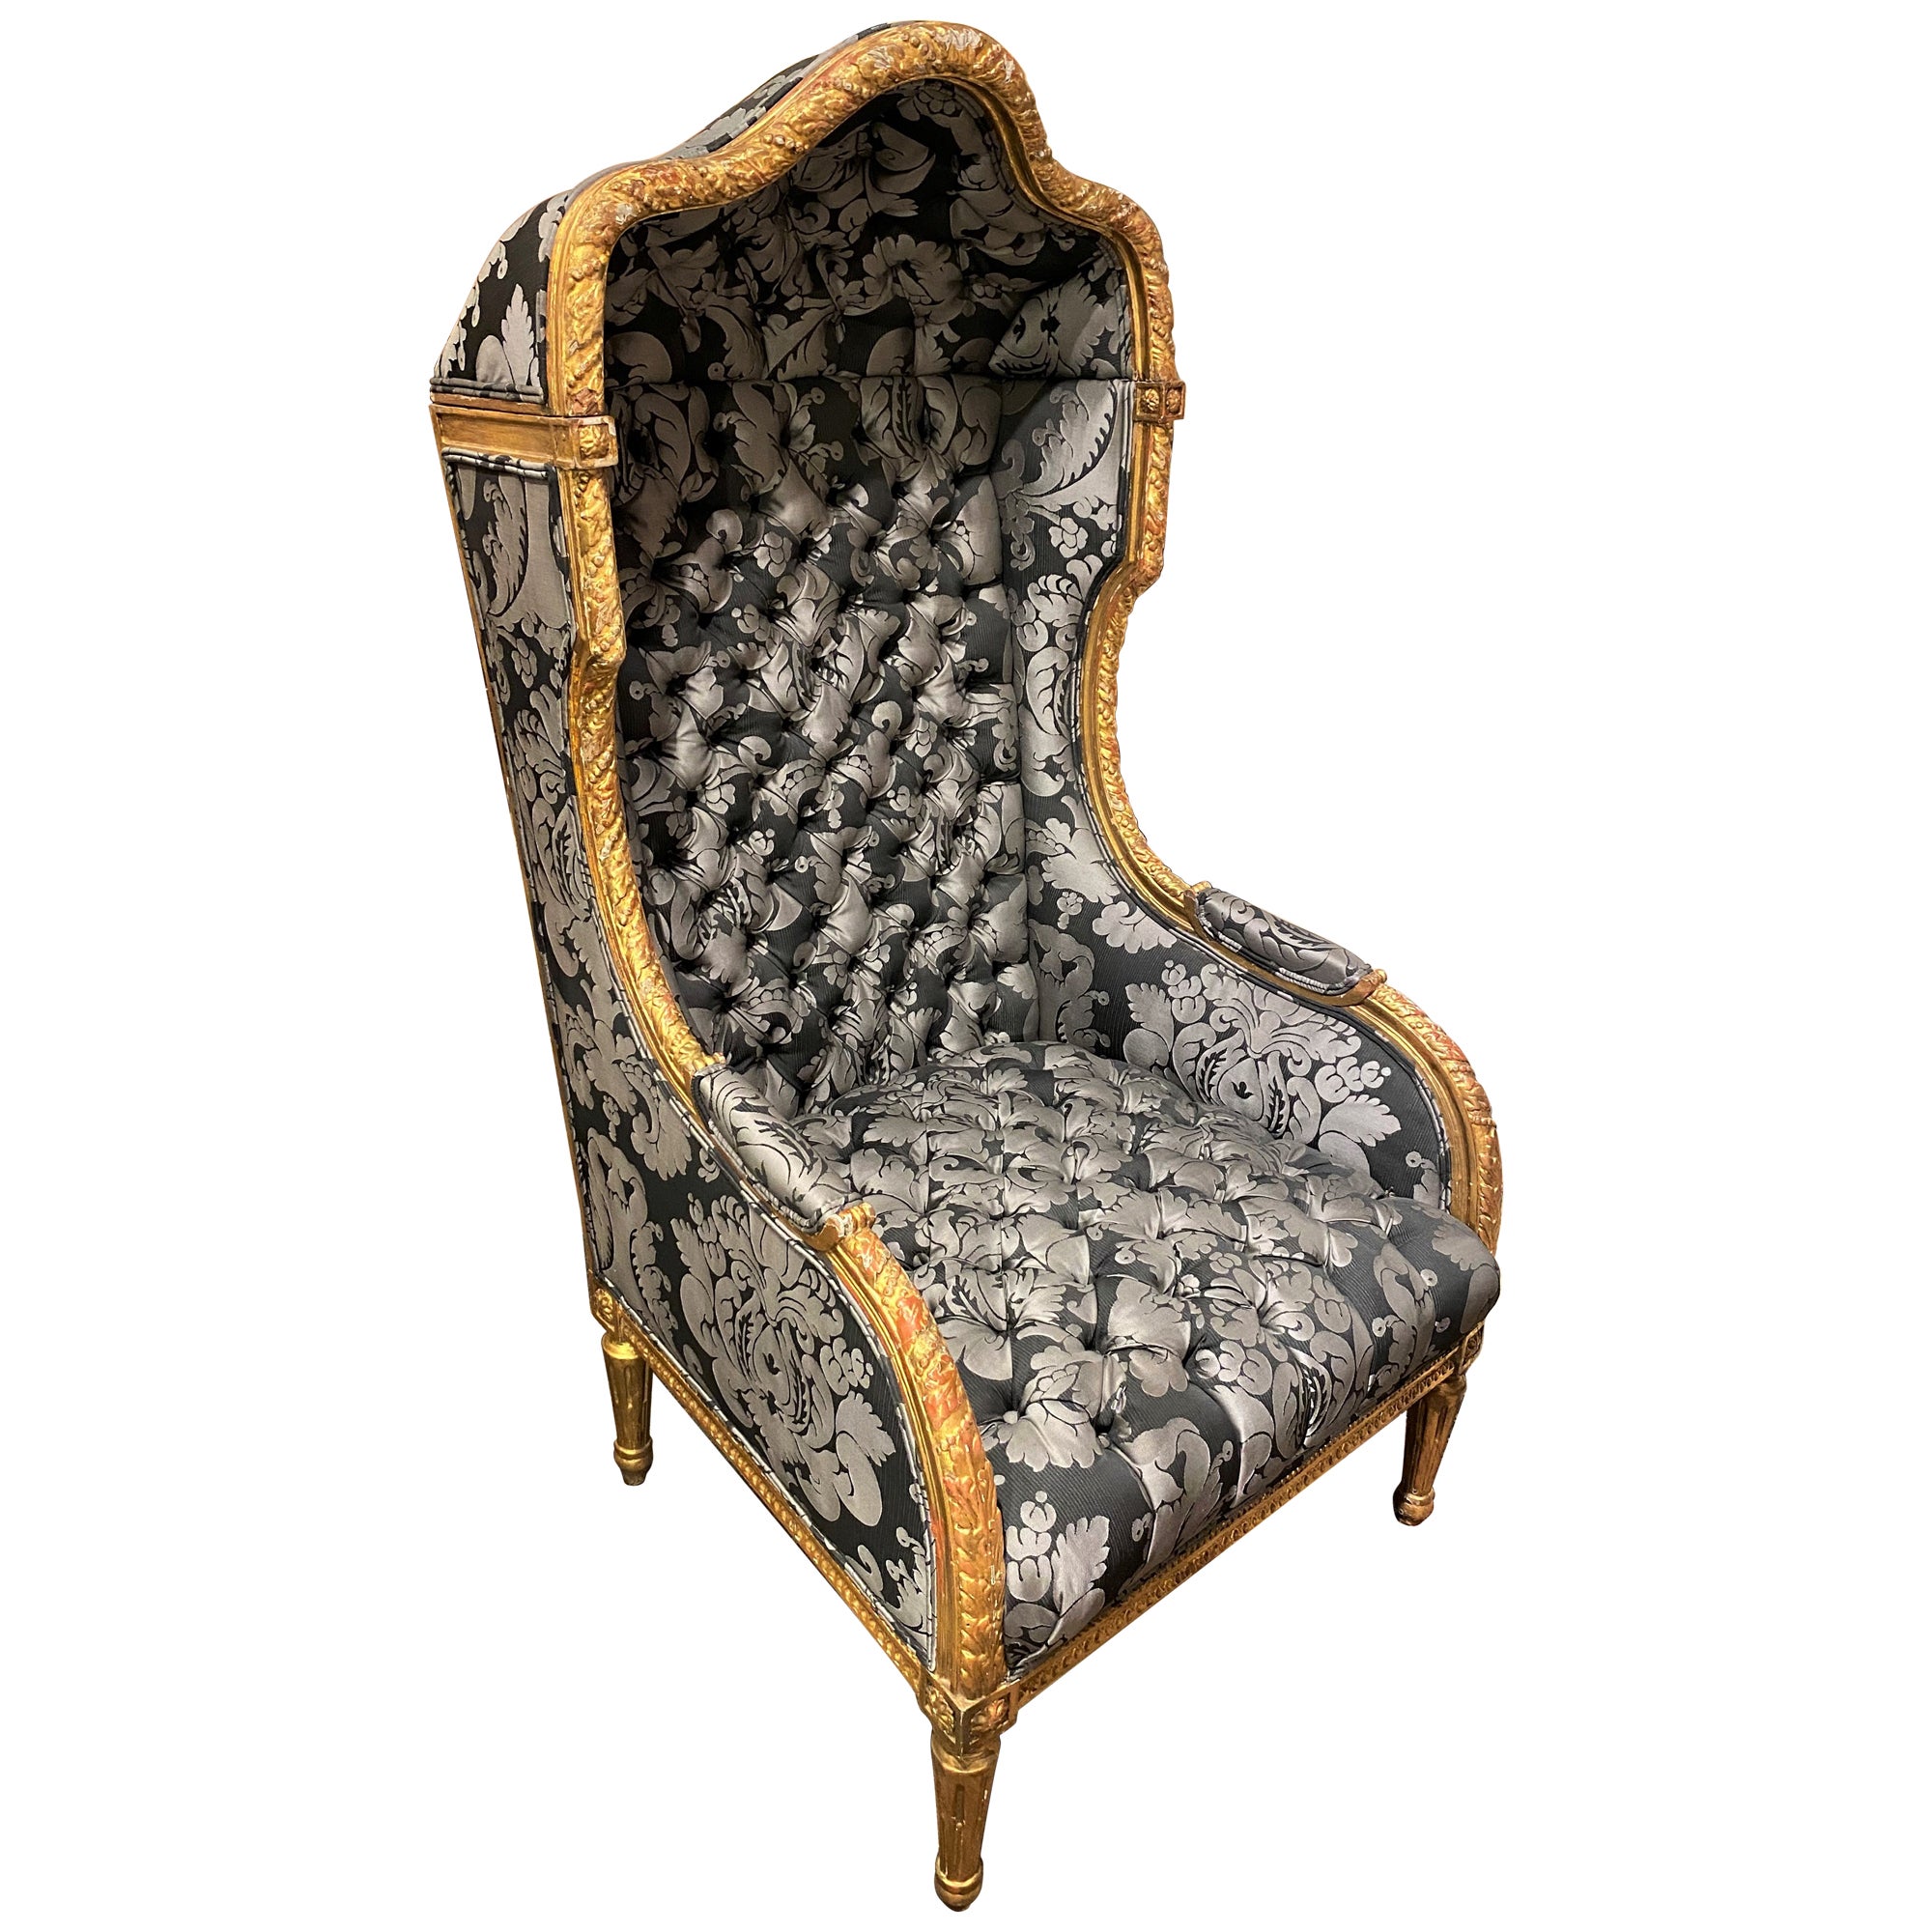 Louis XVI Style Giltwood Porter’s or Hood Chair with Tufted Upholstery For Sale